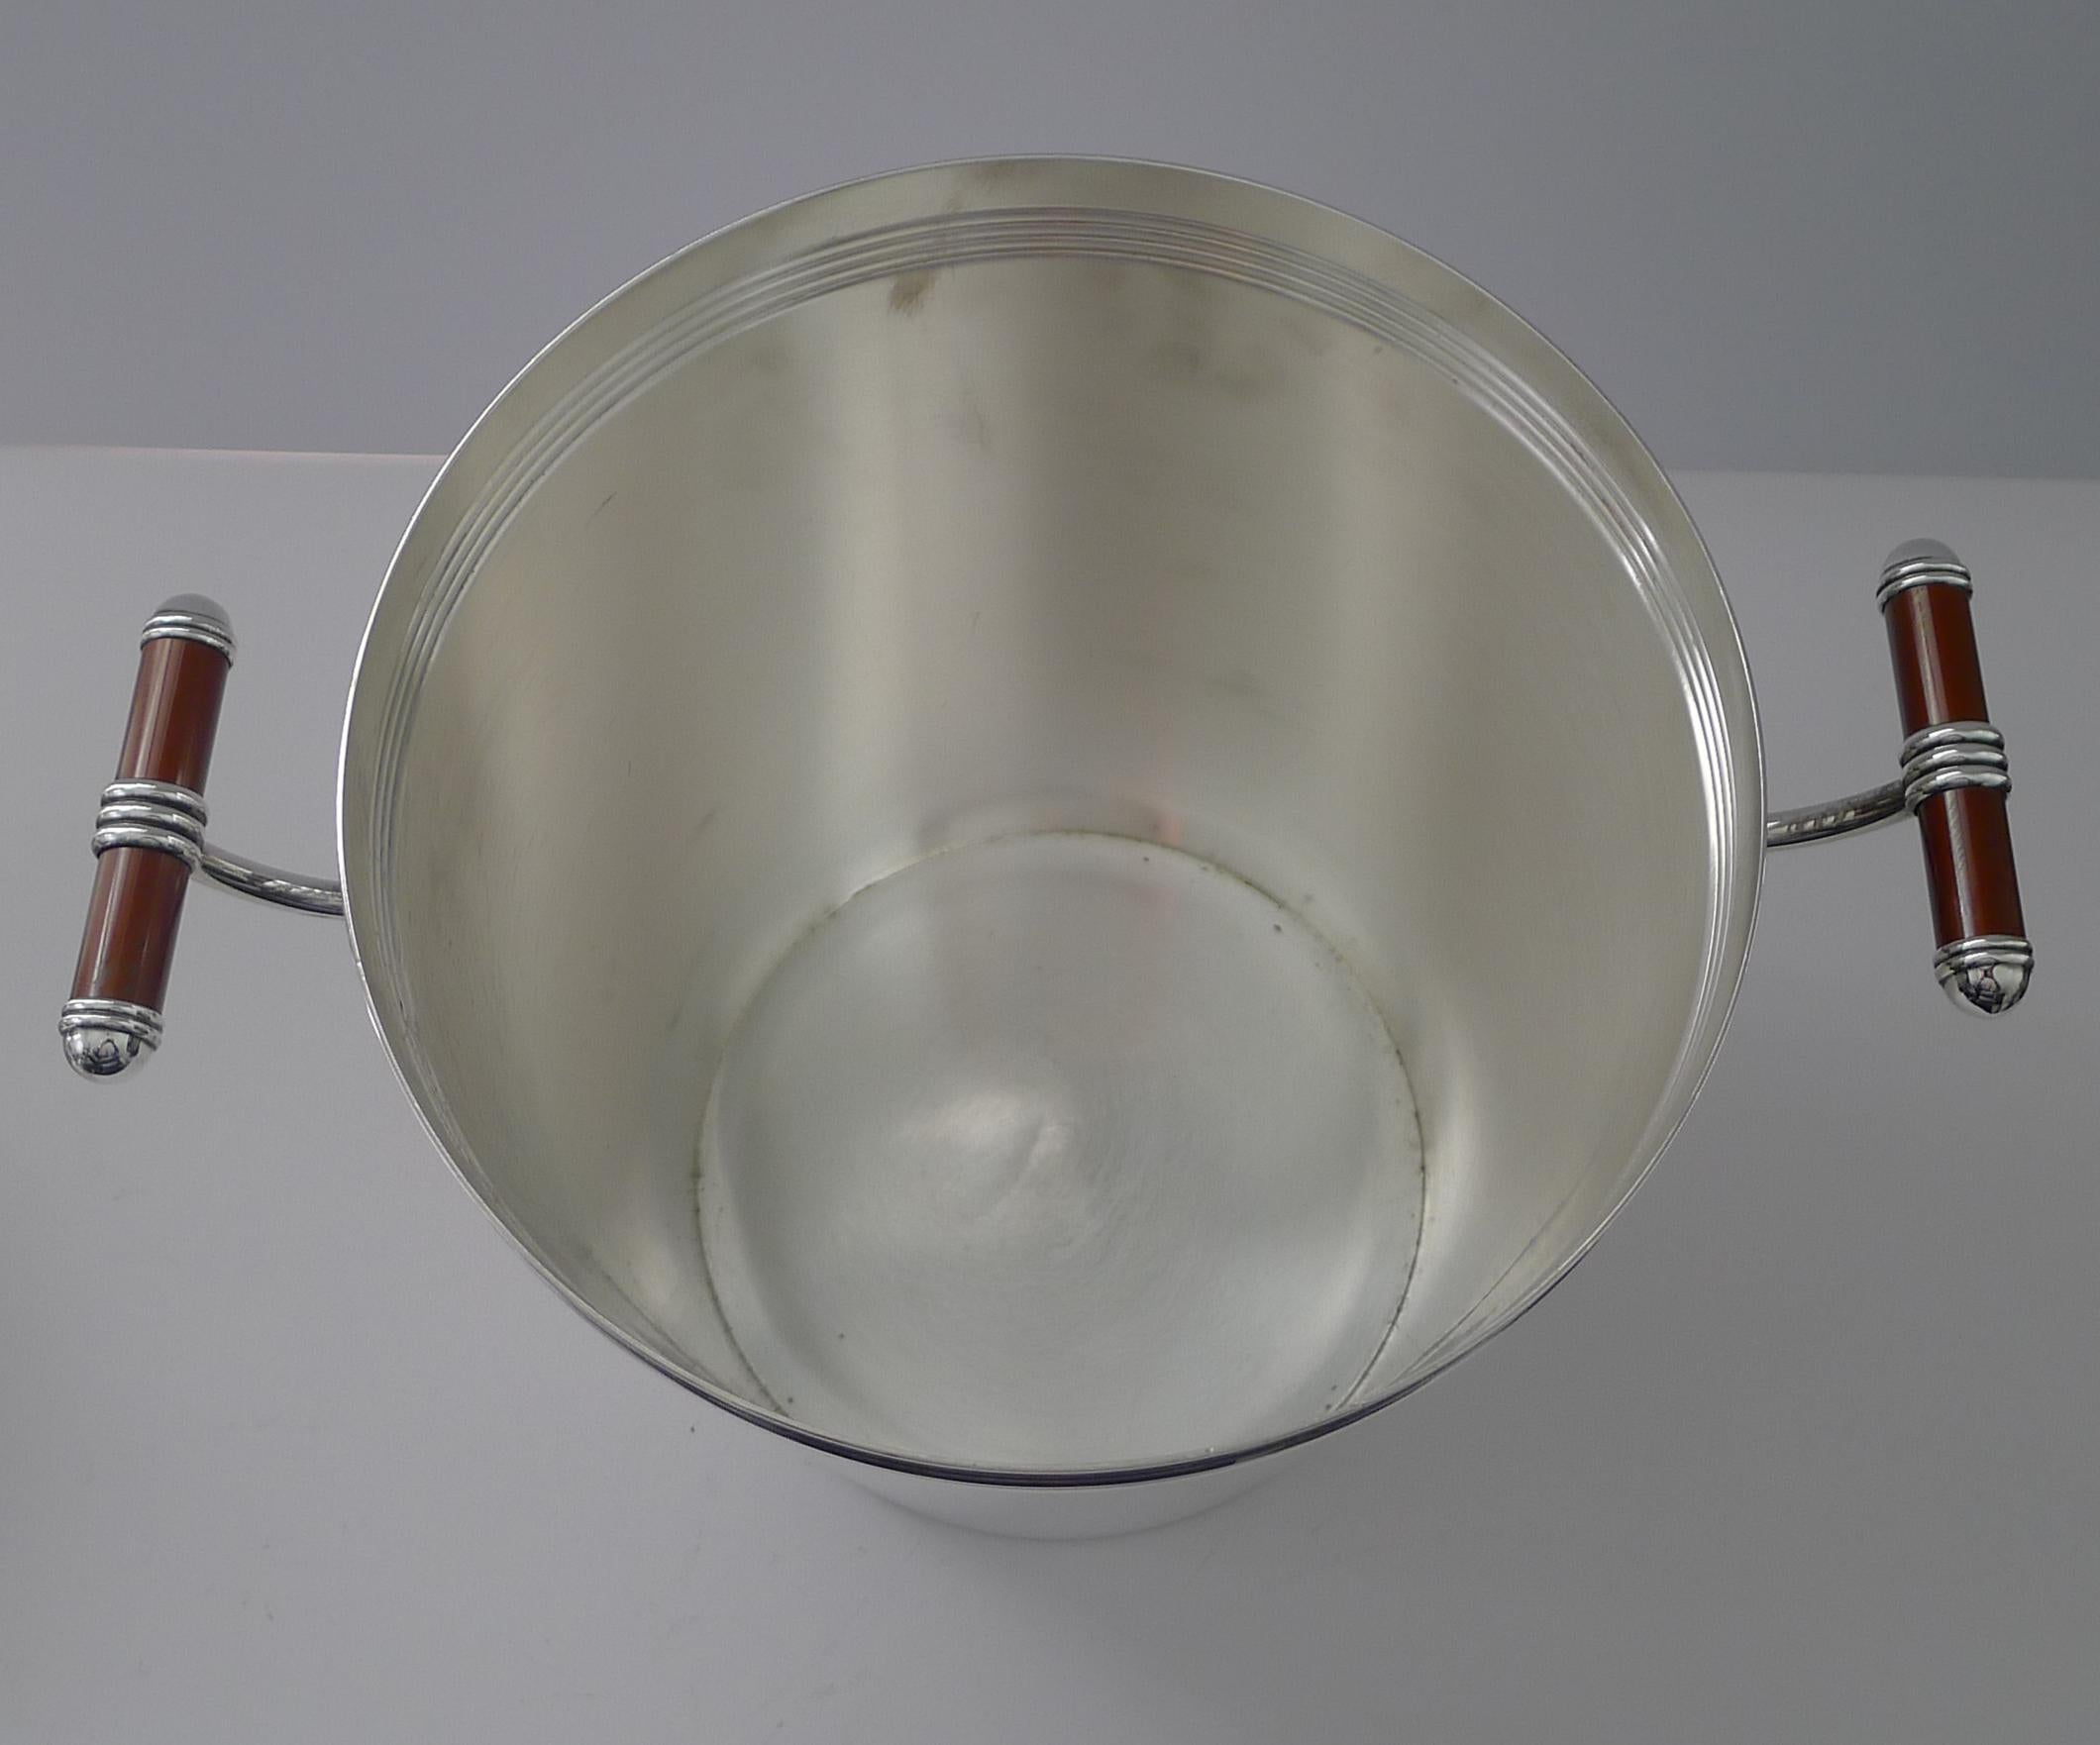 A fabulous vintage Champagne bucket or wine cooler made from silver plate by the top-notch silversmith's, Christofle of Paris.  This is the larger of the two sizes made in this design.

Dating to the late twentieth century c.1990; this is a hard